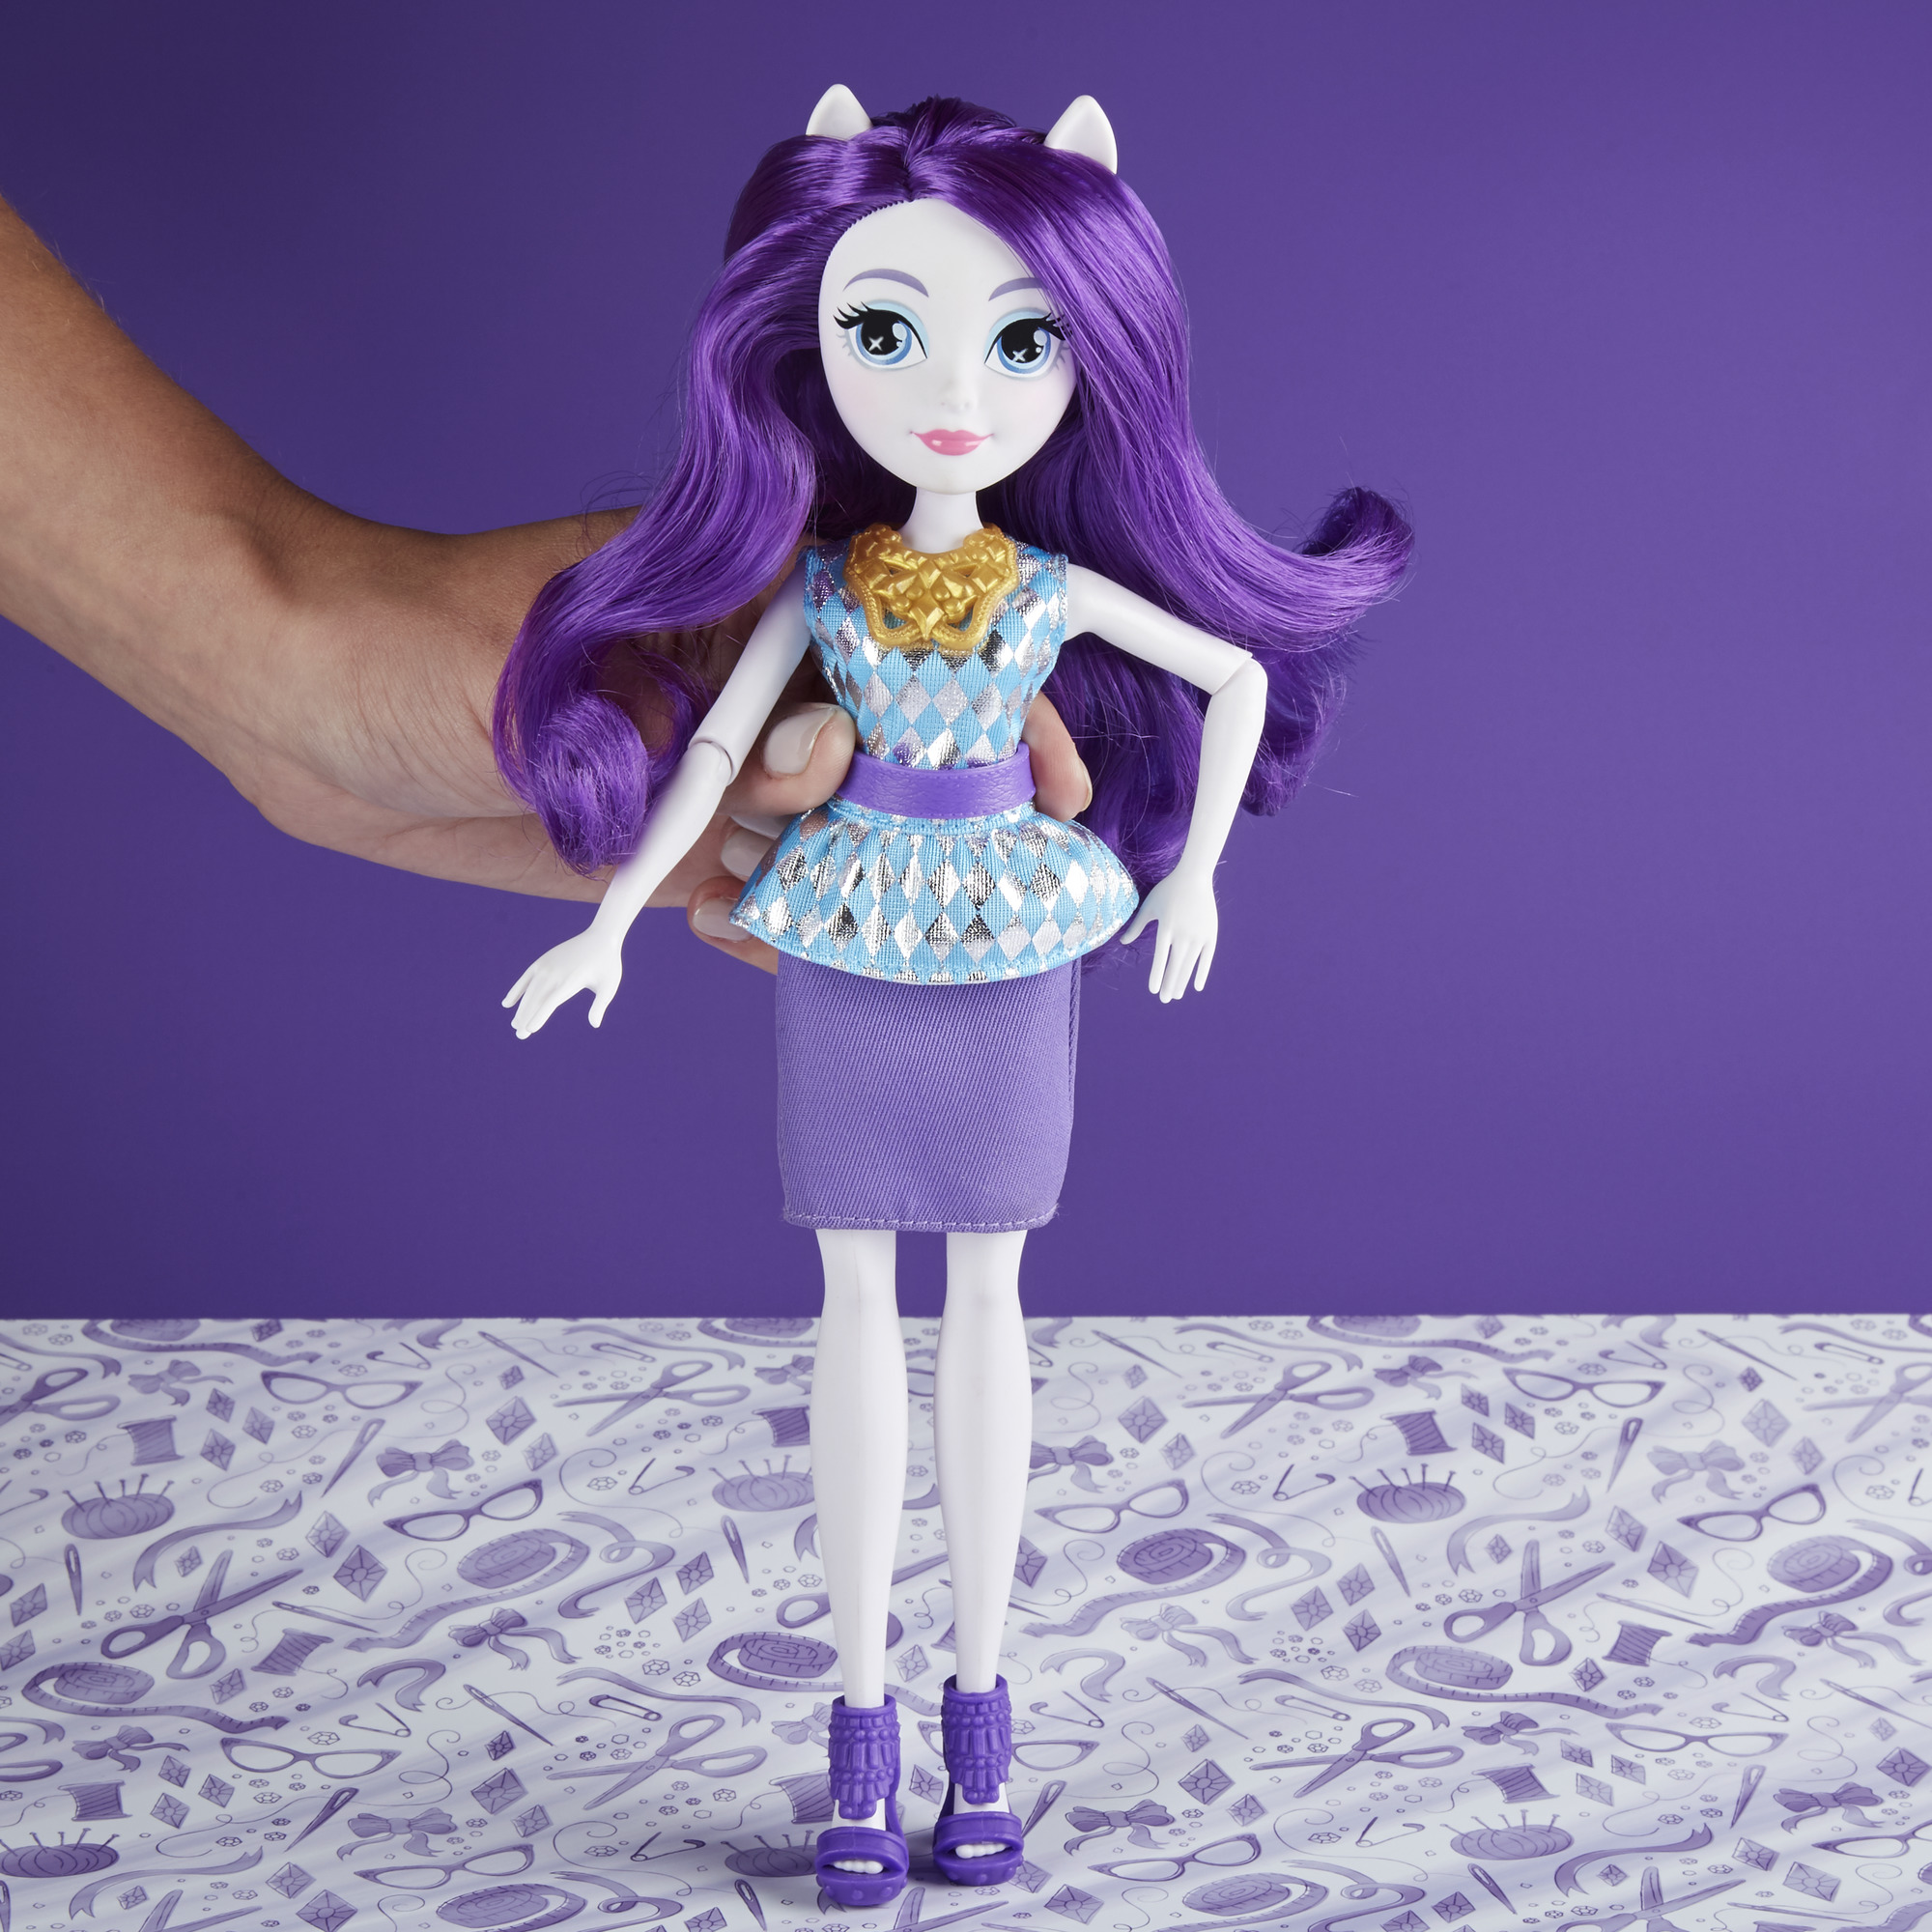 My Little Pony Equestria Girls Rarity Classic Style Doll - image 4 of 9